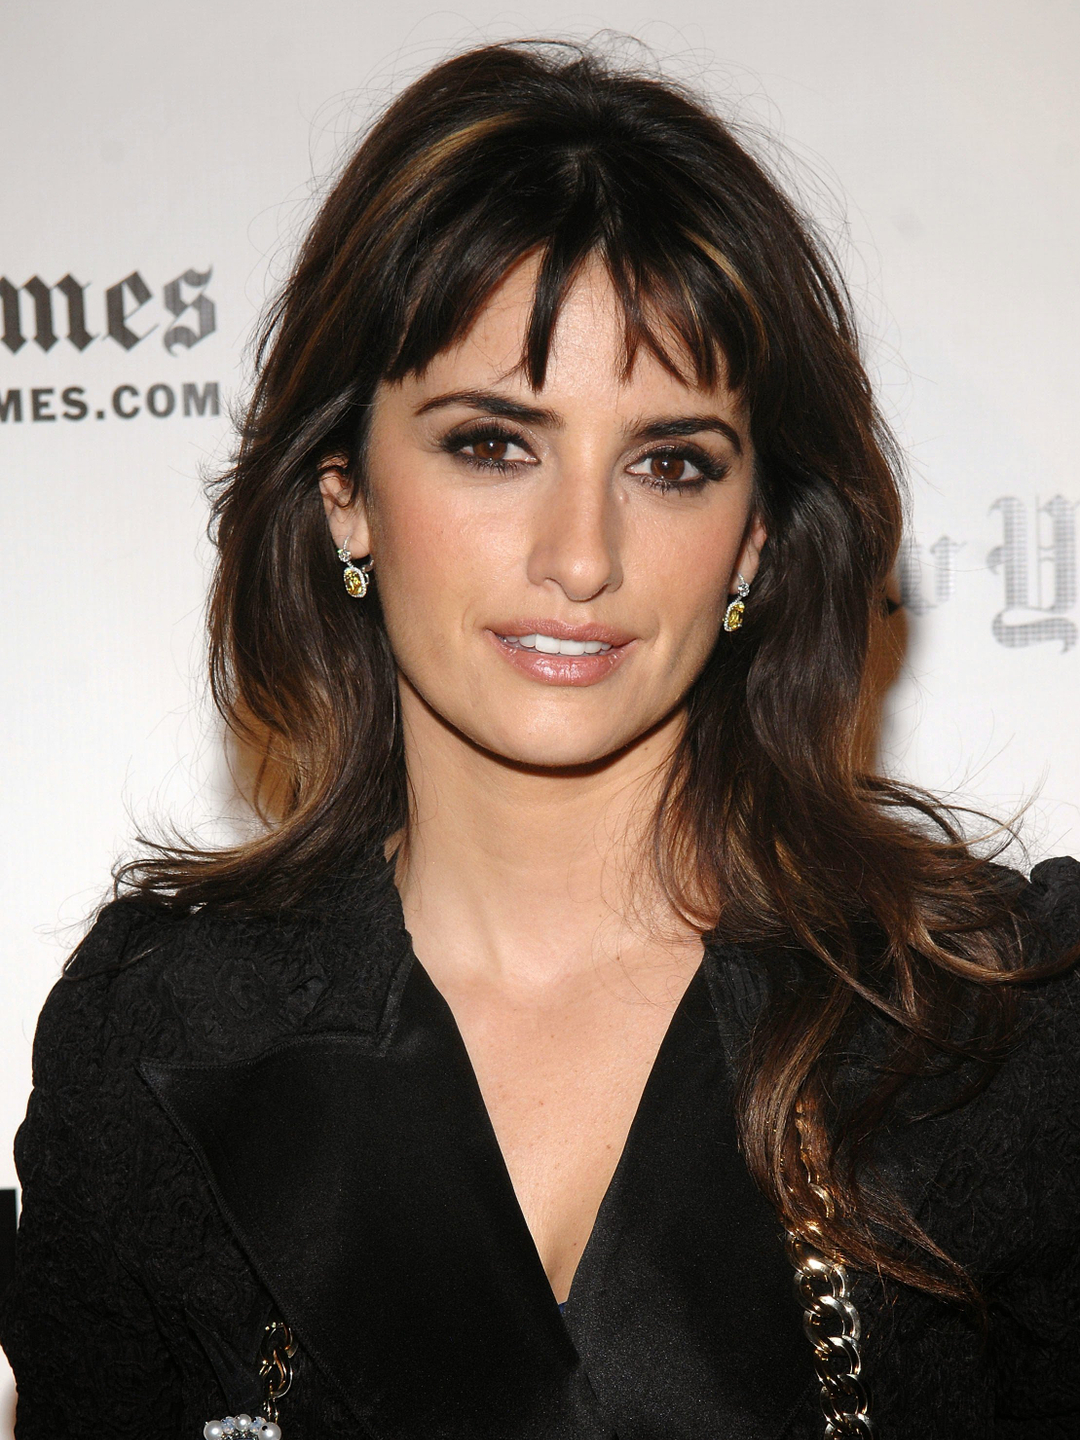 Penelope Cruz how did she became famous